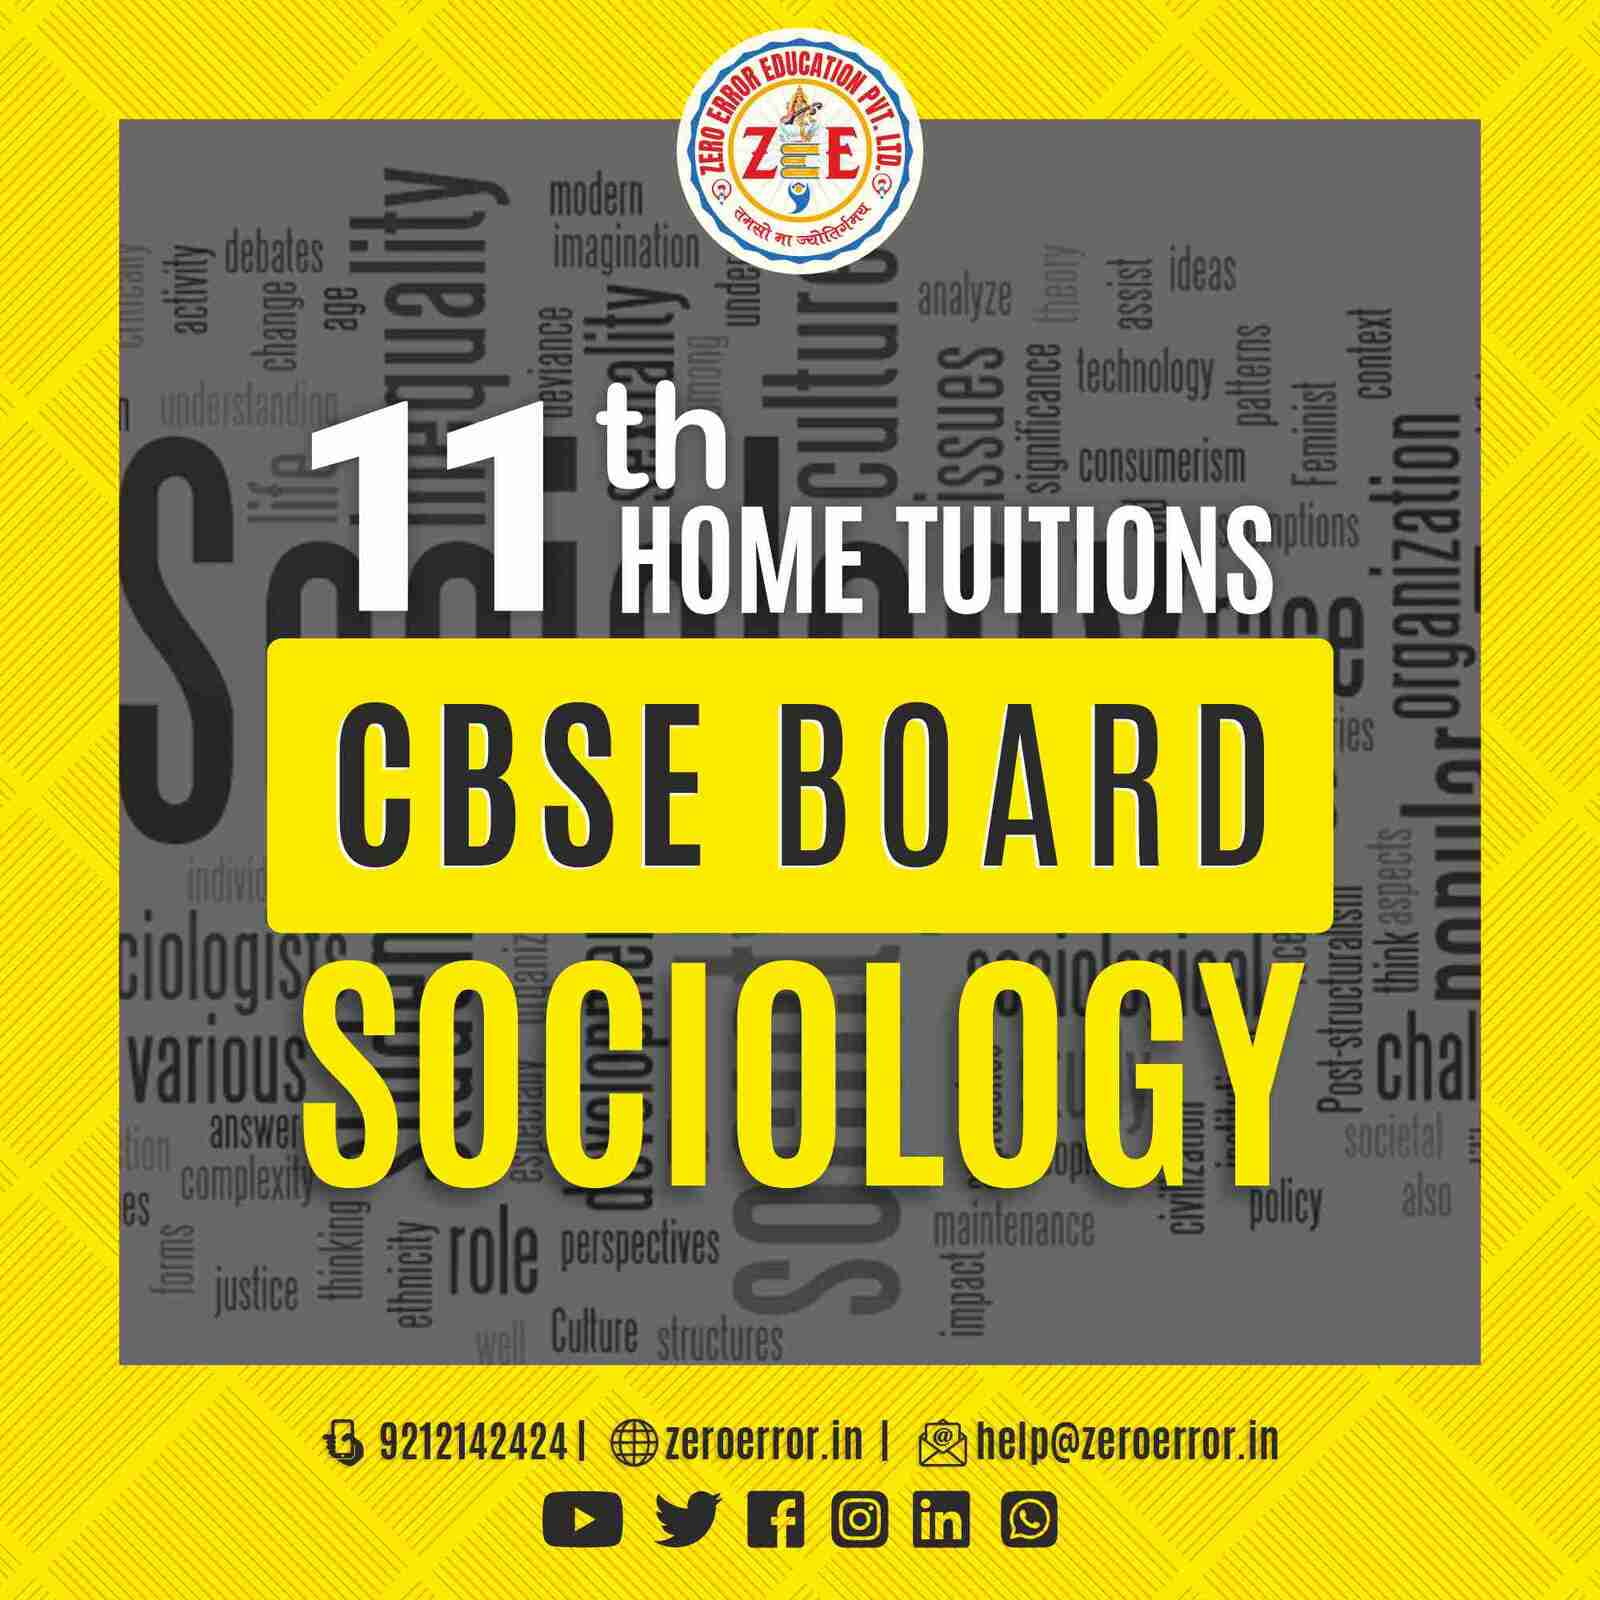 11th Grade CBSE Sociology Online Classes by Zero Error Education Prepare for your CBSE board exams with online and offline Sociology classes for 11th grade. Learn from experienced home tutors and get all the help you need to succeed. Enroll today at Zero Error Education. [https://zeroerror.in/] Call 9212142424 for more information.